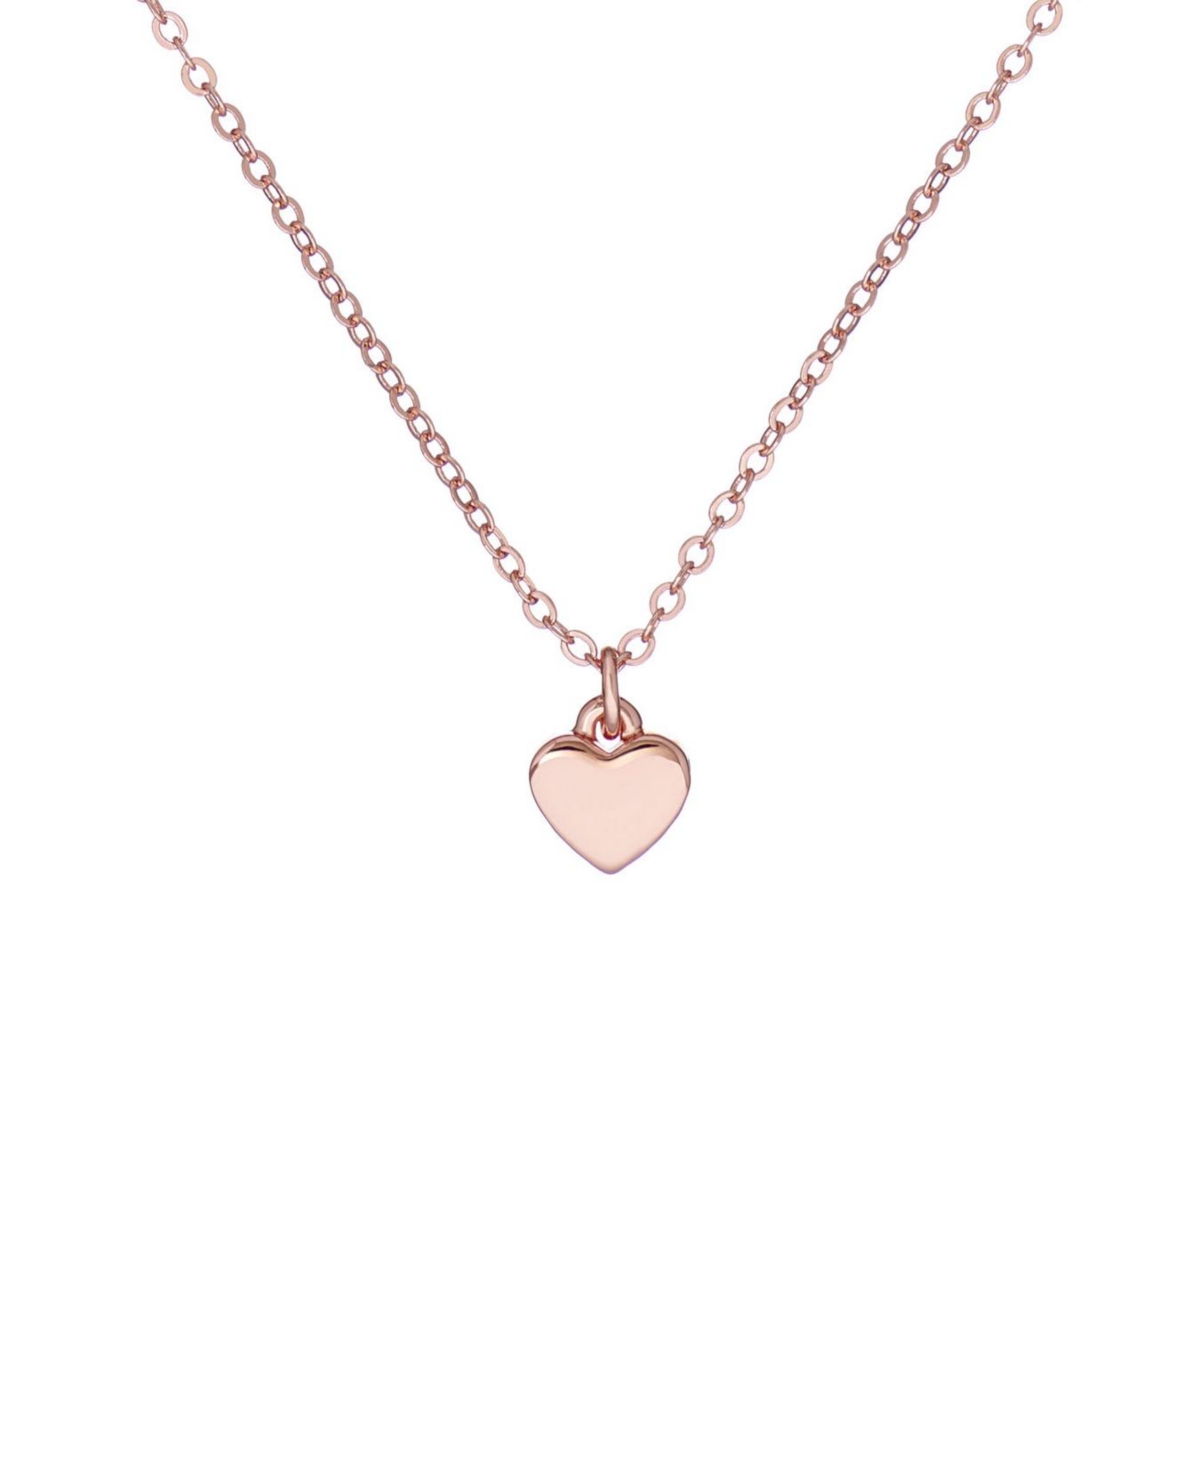 TED BAKER HARA: TINY HEART PENDANT NECKLACE FOR WOMEN